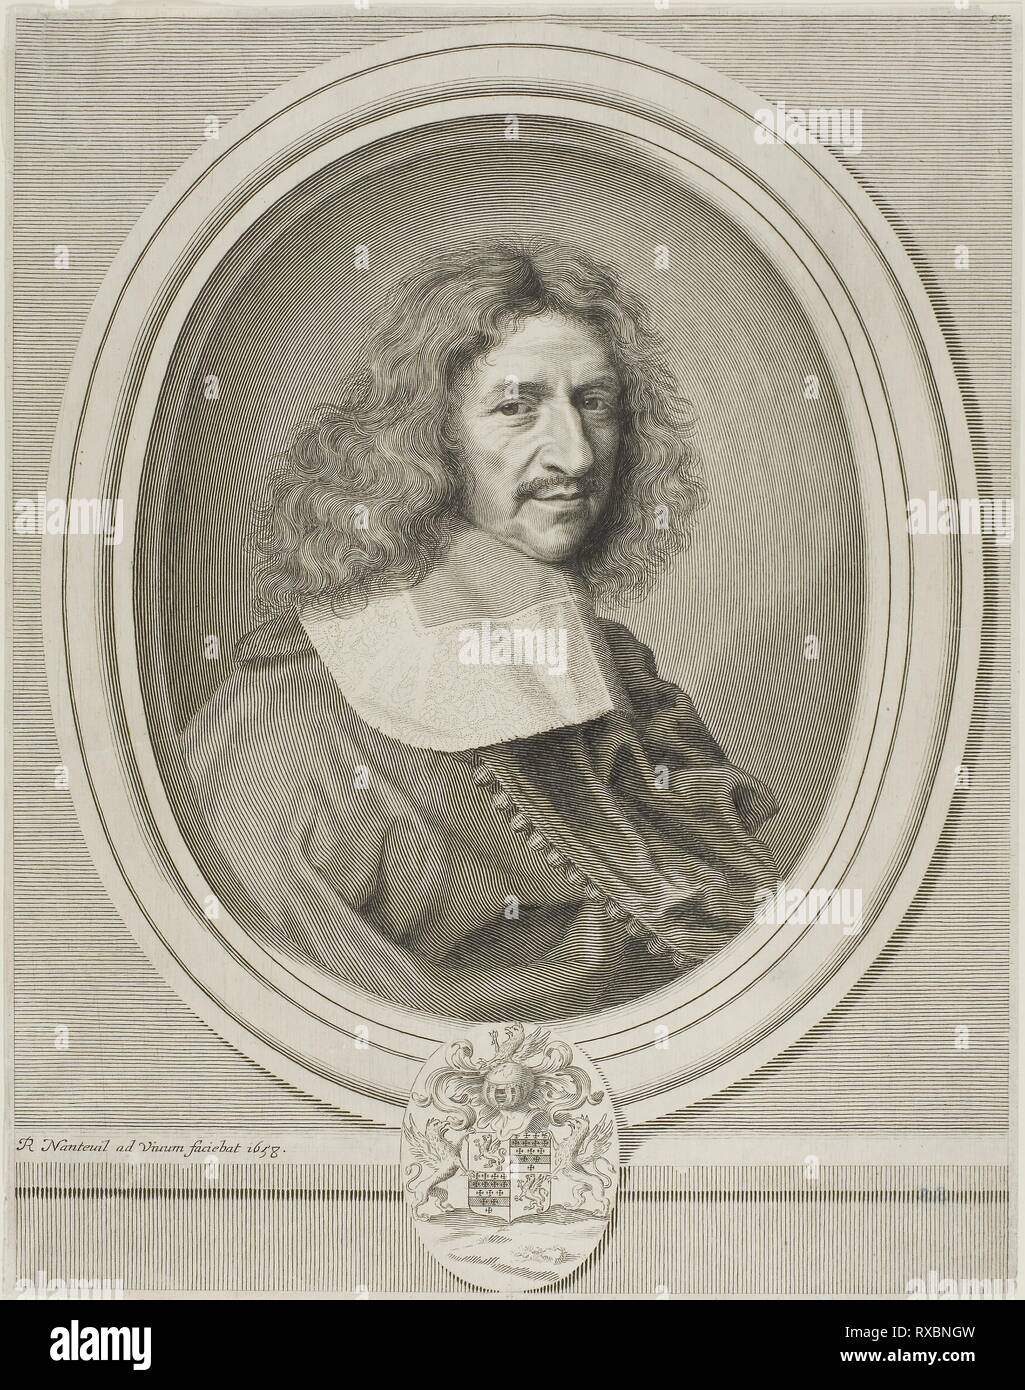 Louis Hesselin. Robert Nanteuil; French, 1623-1678. Date: 1658. Dimensions: 328 × 257 mm. Engraving on paper. Origin: France. Museum: The Chicago Art Institute. Stock Photo